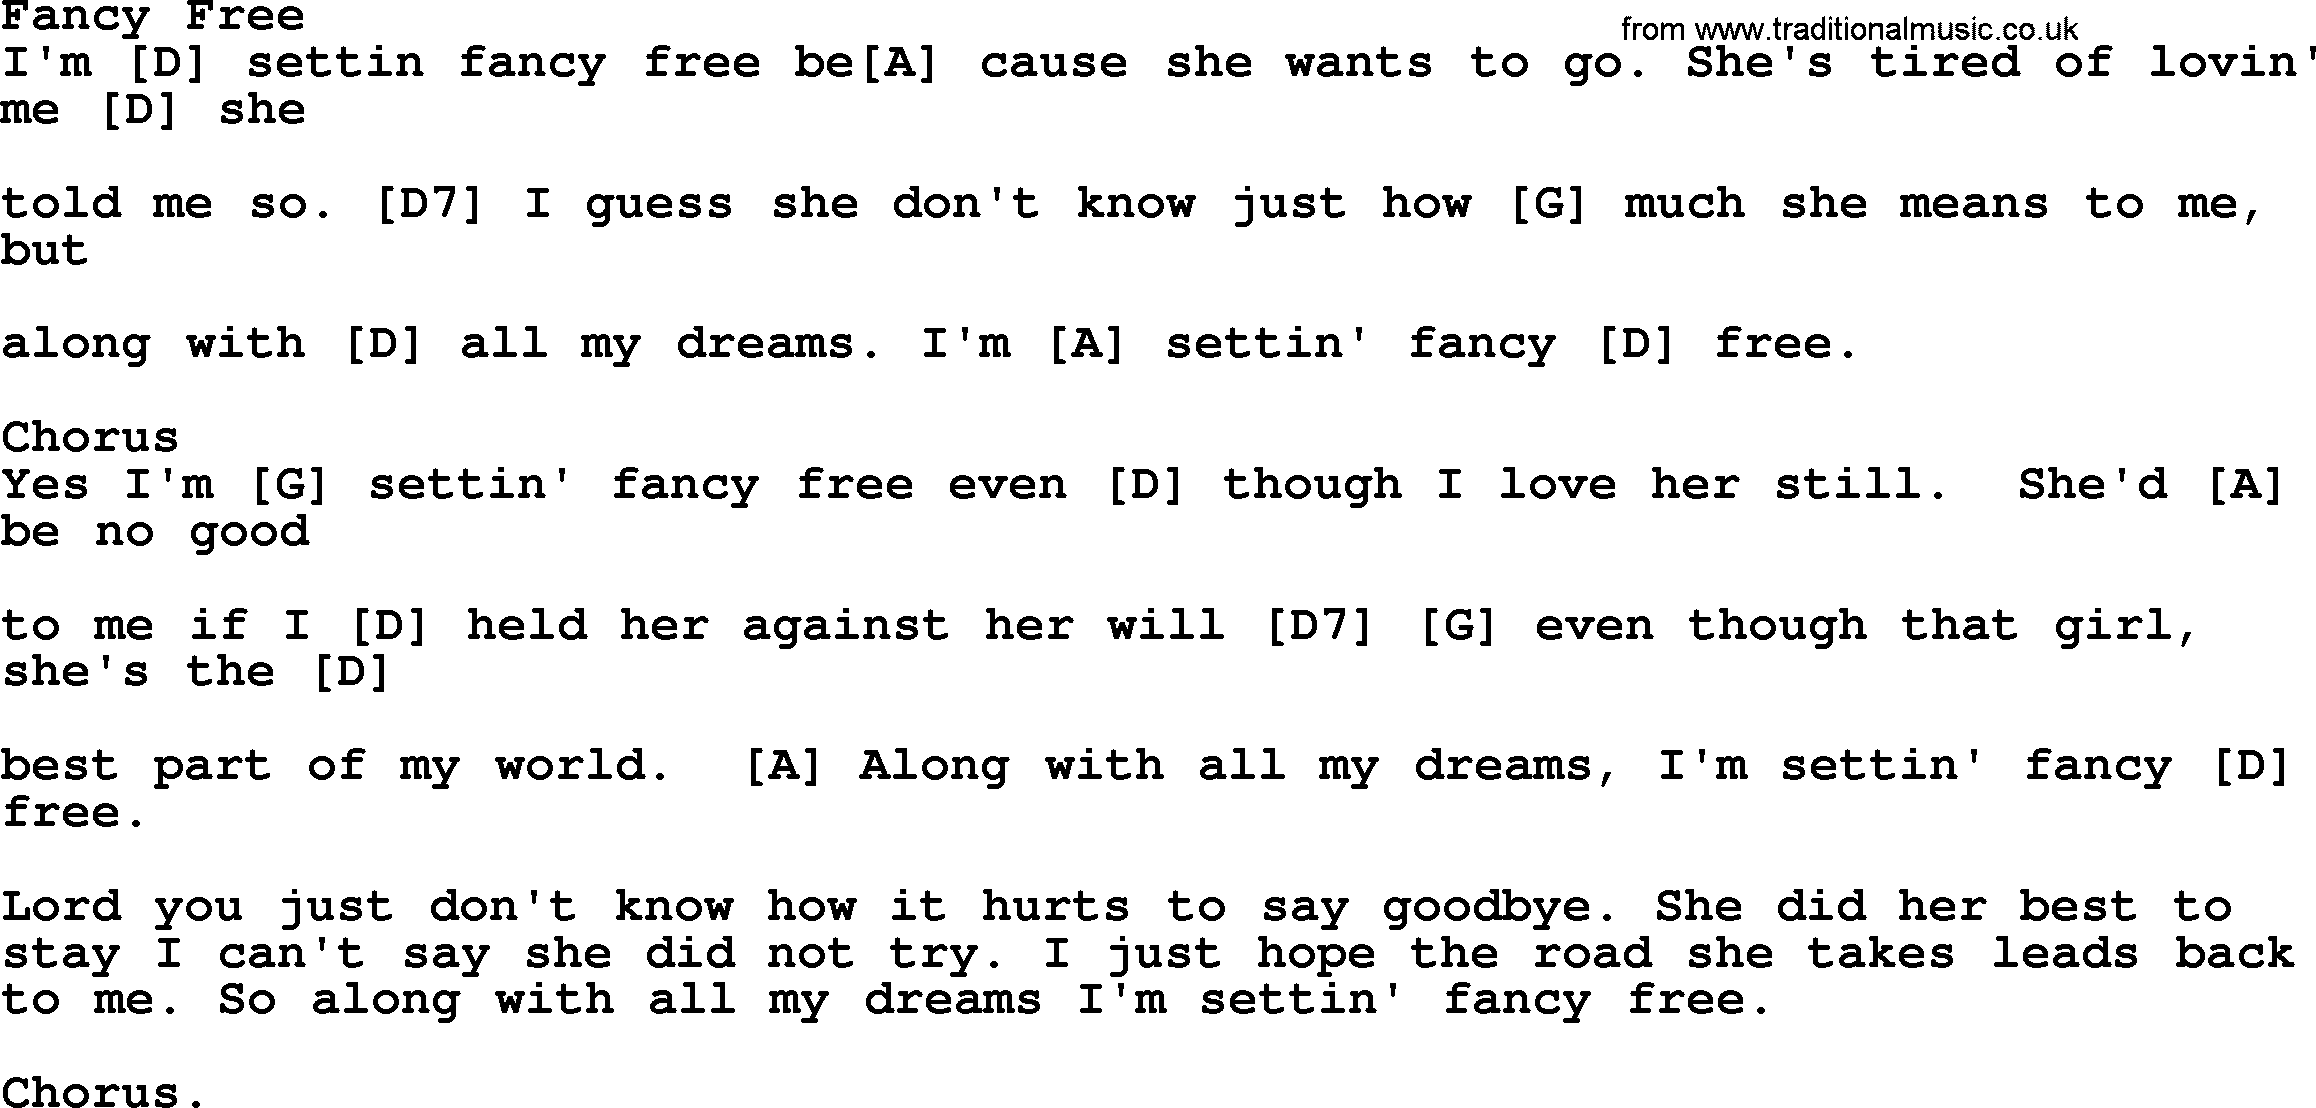 Bluegrass song: Fancy Free, lyrics and chords